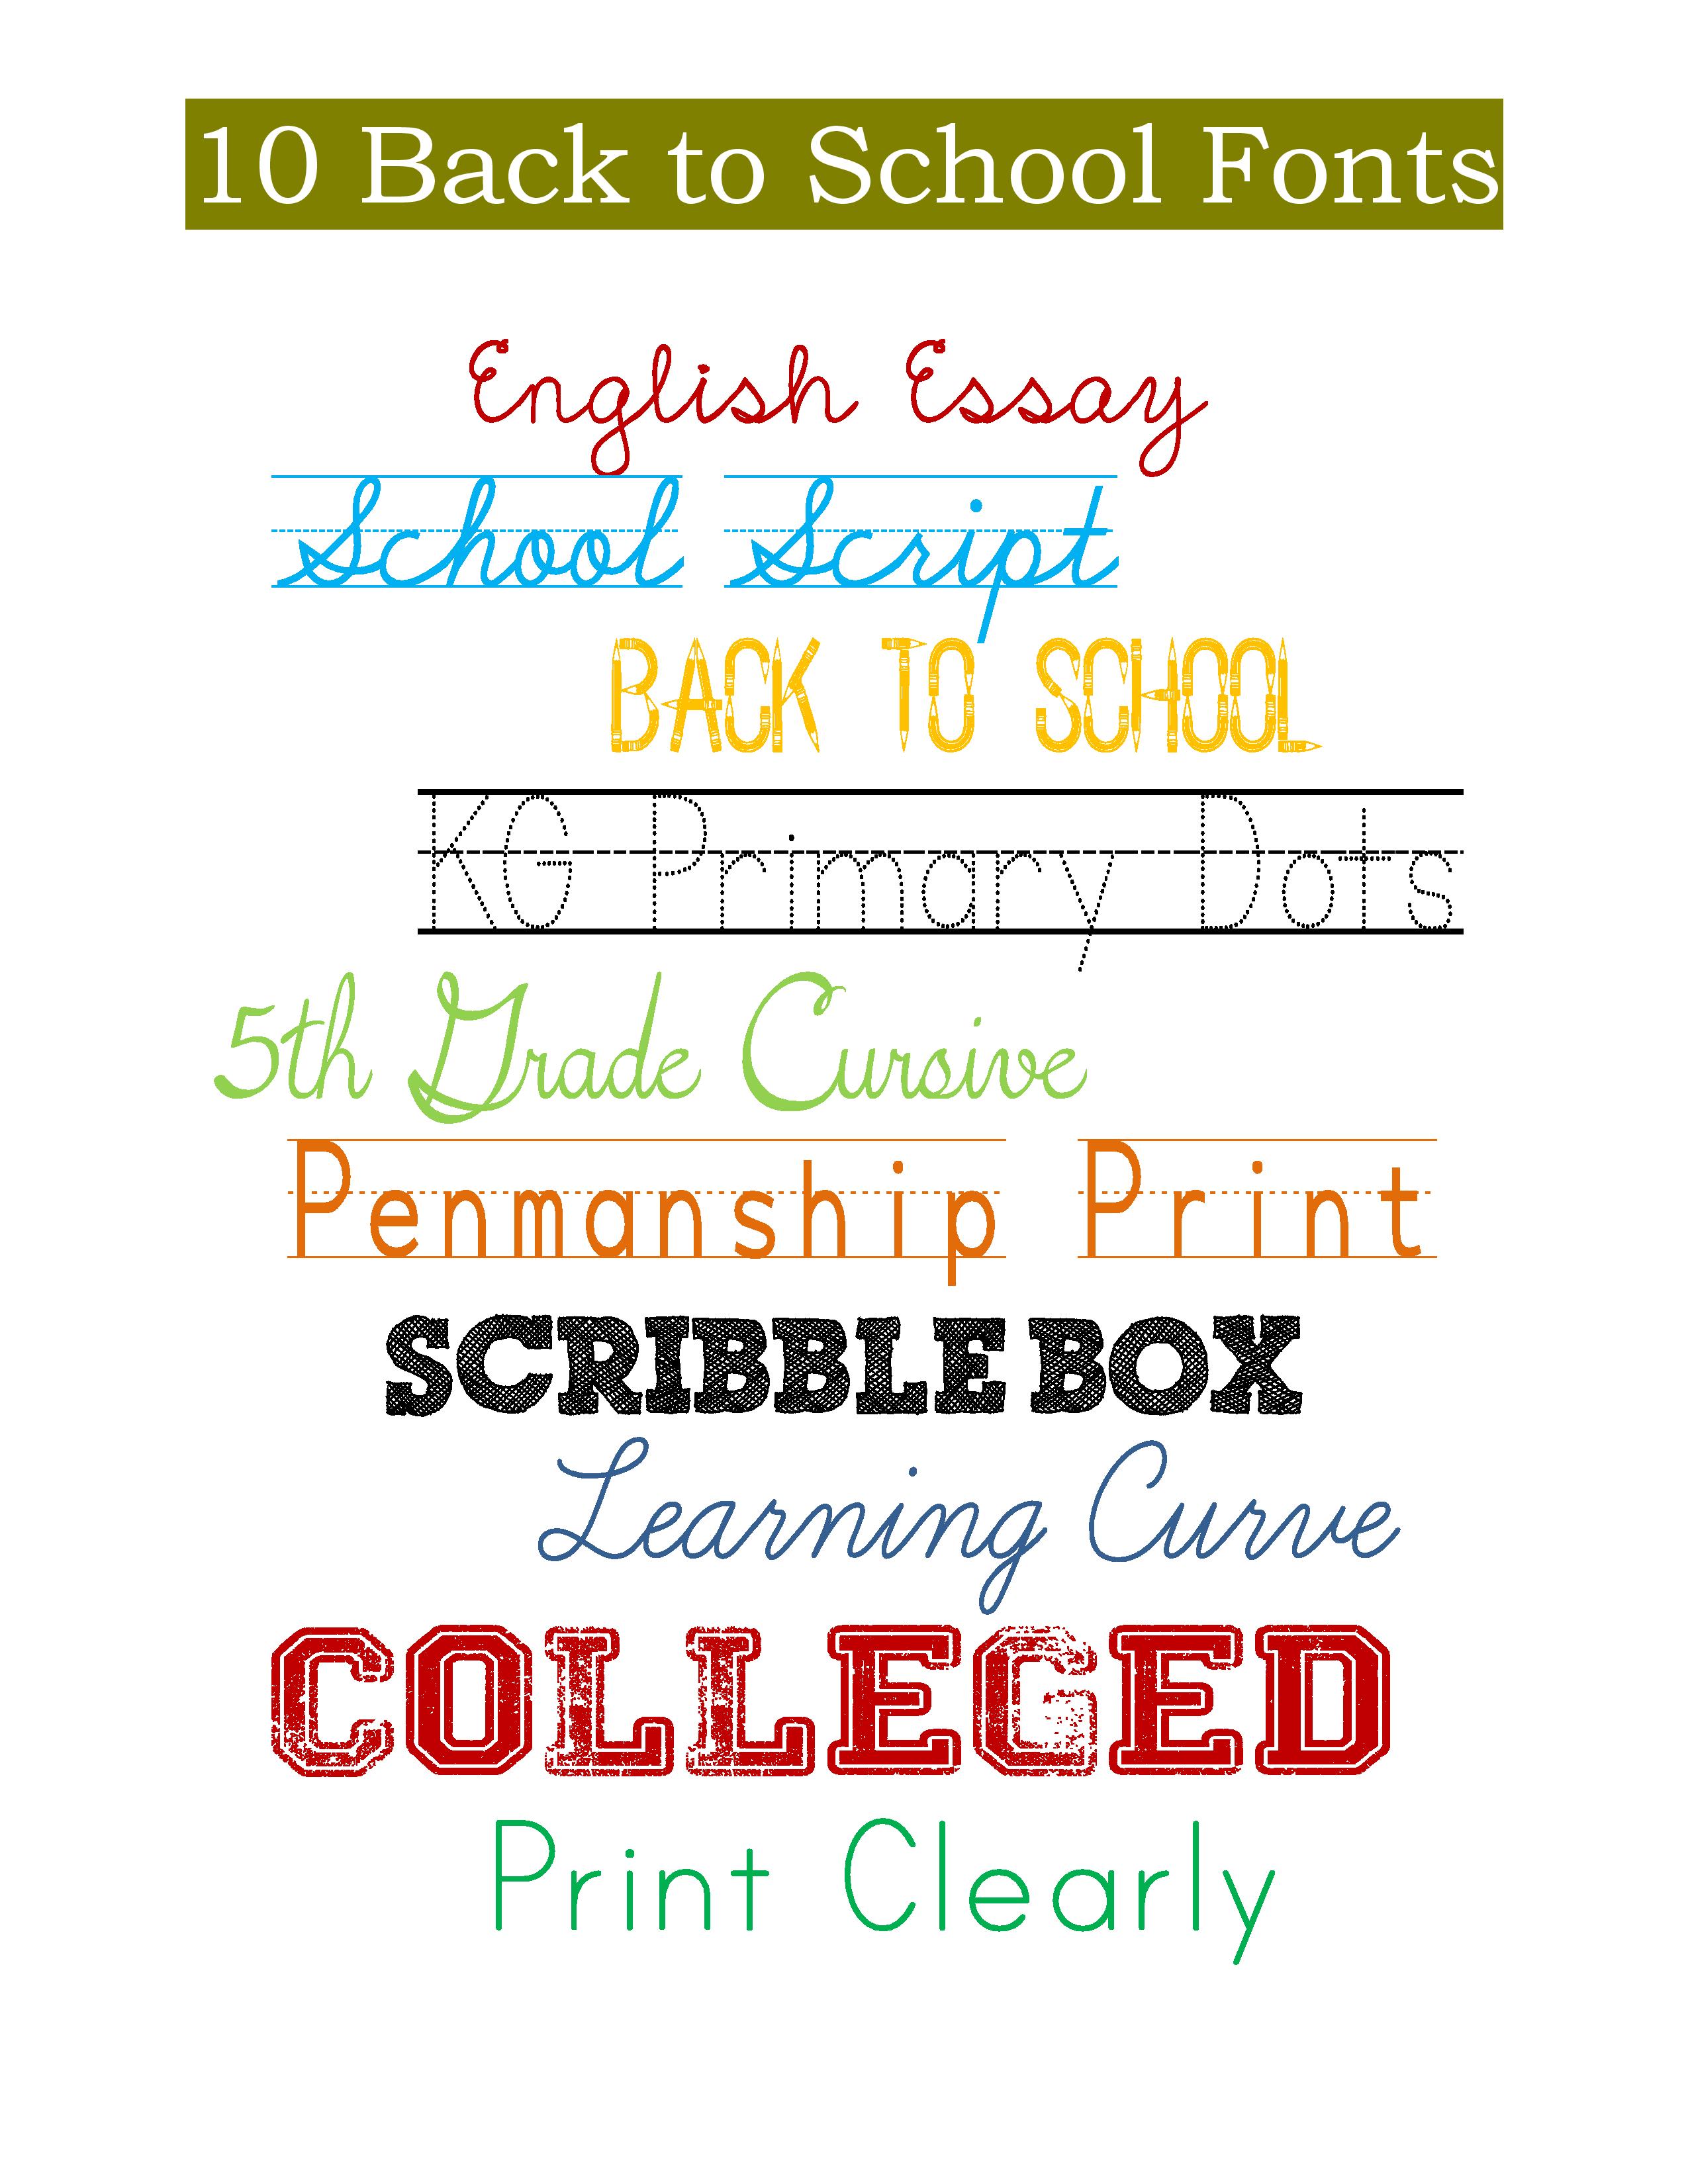 10 back to school fonts